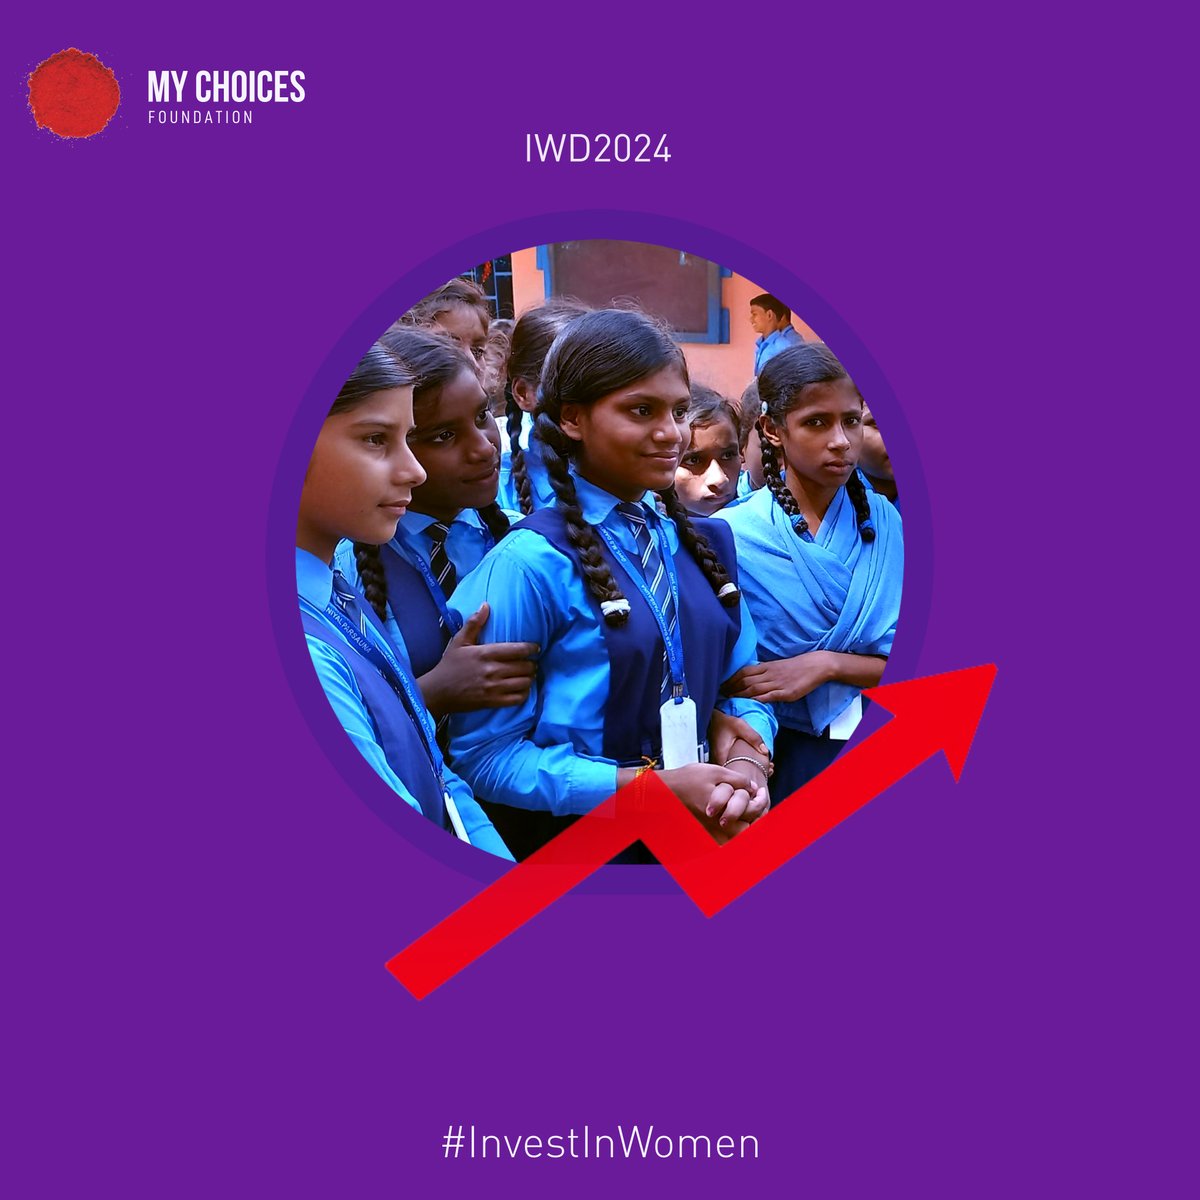 On #InternationalWomensDay, let’s continue our fight to give women, children, and families the choice to live a life free from abuse, violence, and exploitation. Join us and #InvestInWomen. Donate at the link: shorturl.at/hnwSV! #IWD2024